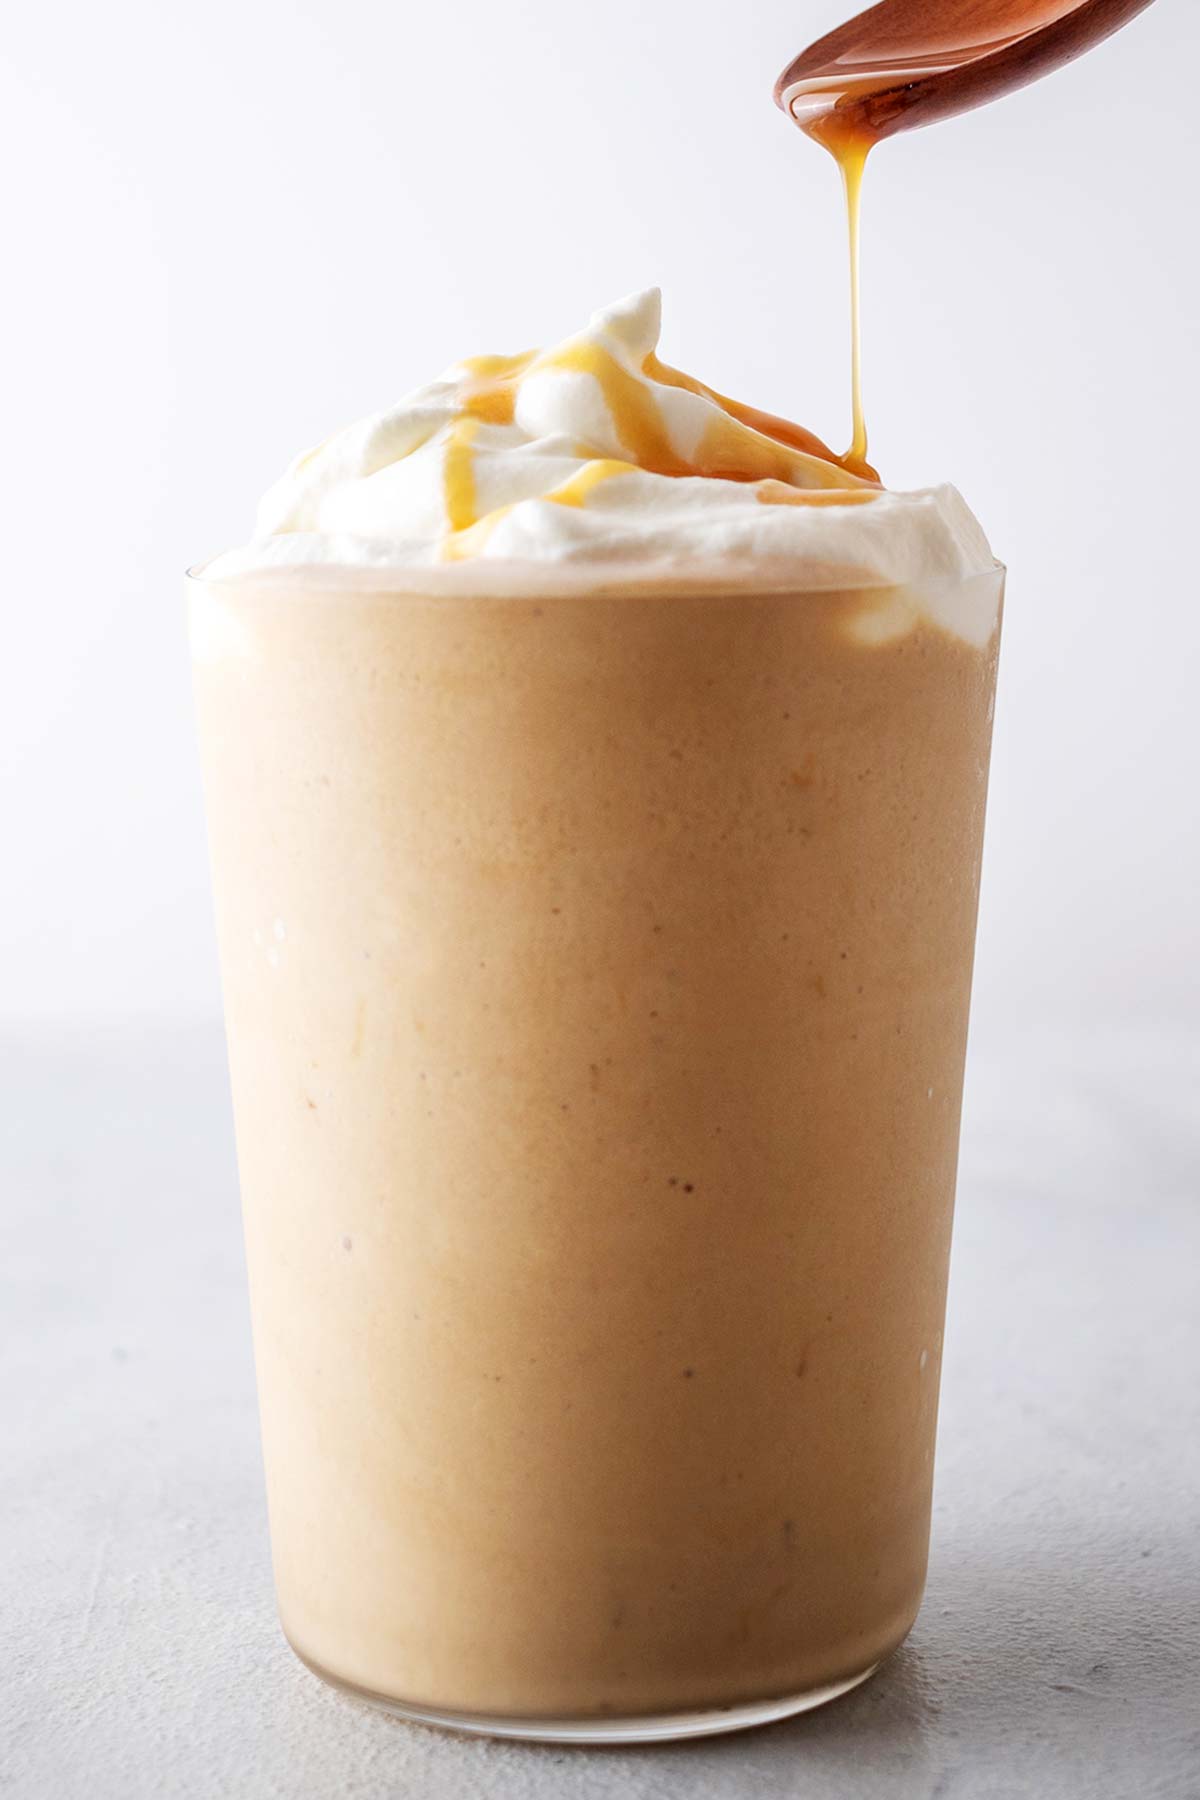 Drizzling caramel on top of whipped cream on a Starbucks Caramel Frappuccino.